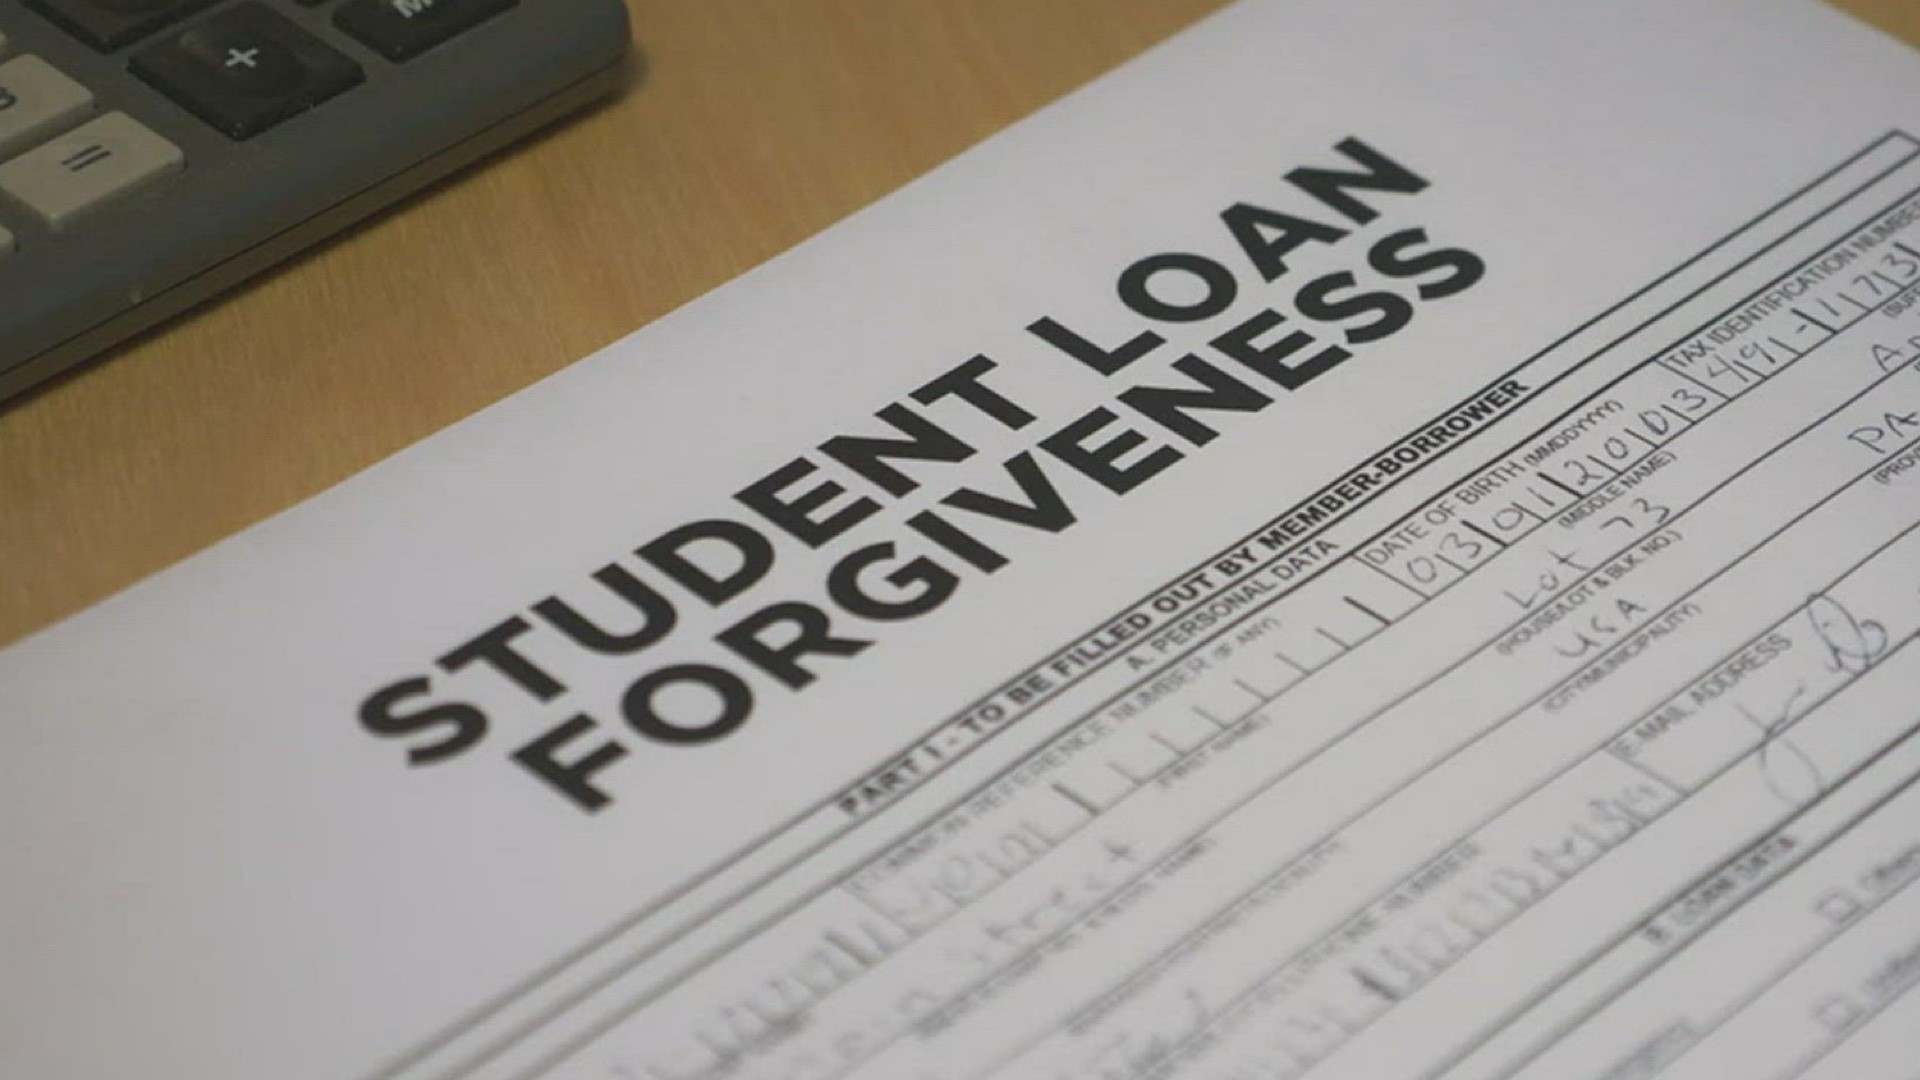 The Biden Administration recently upgraded their student loan forgiveness program to forgive up to $12,000 per student.